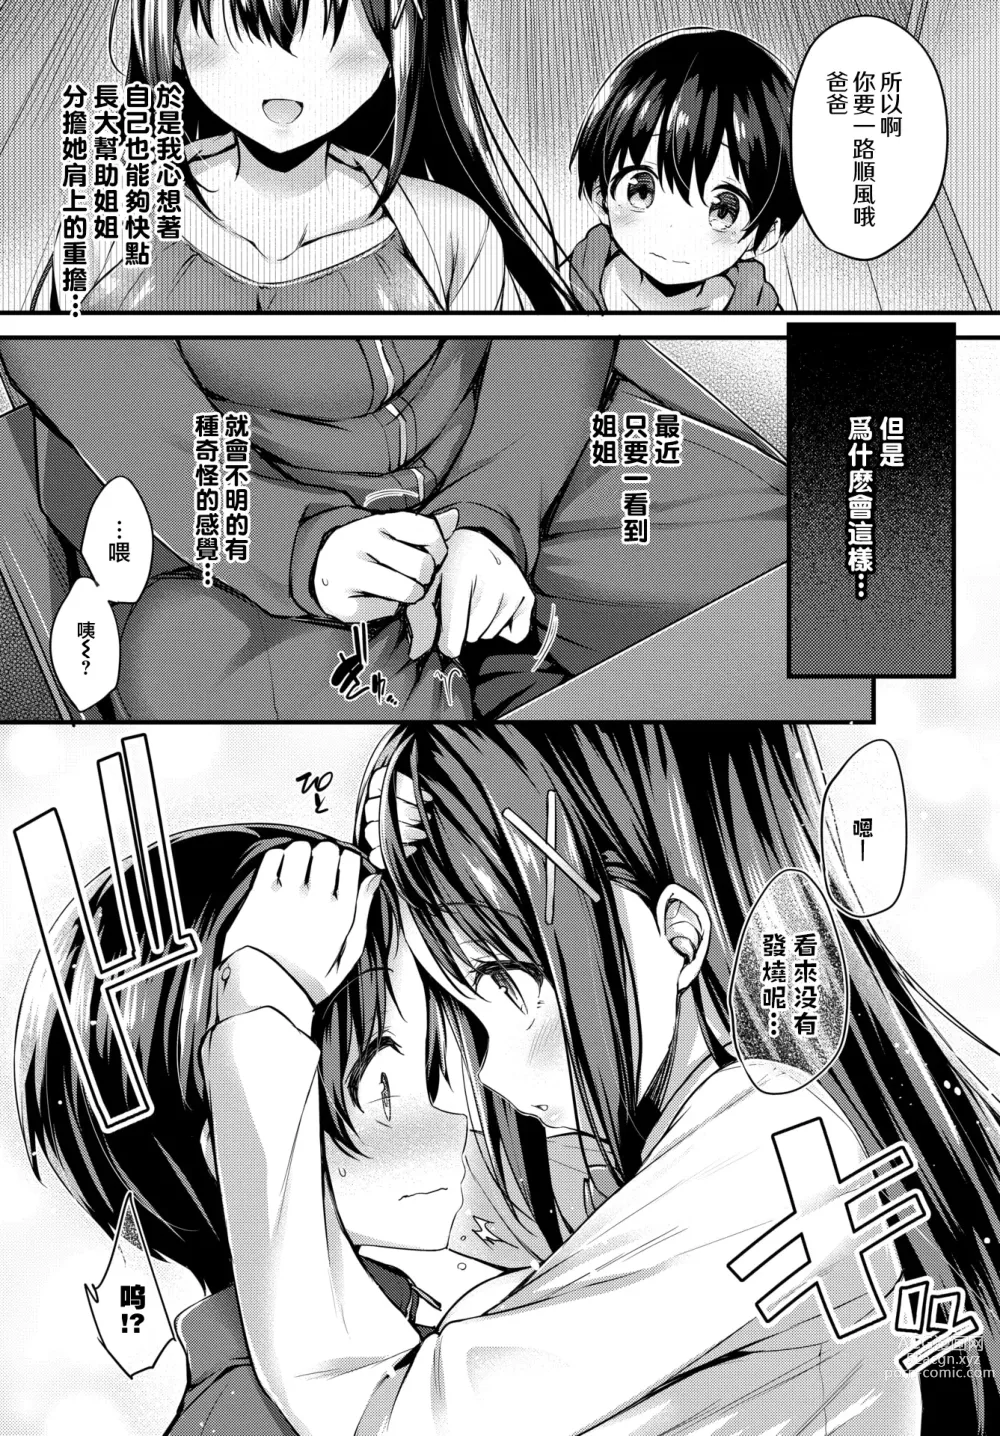 Page 4 of manga Boku no Onee-chan - My beloved was defiled and taken from me...